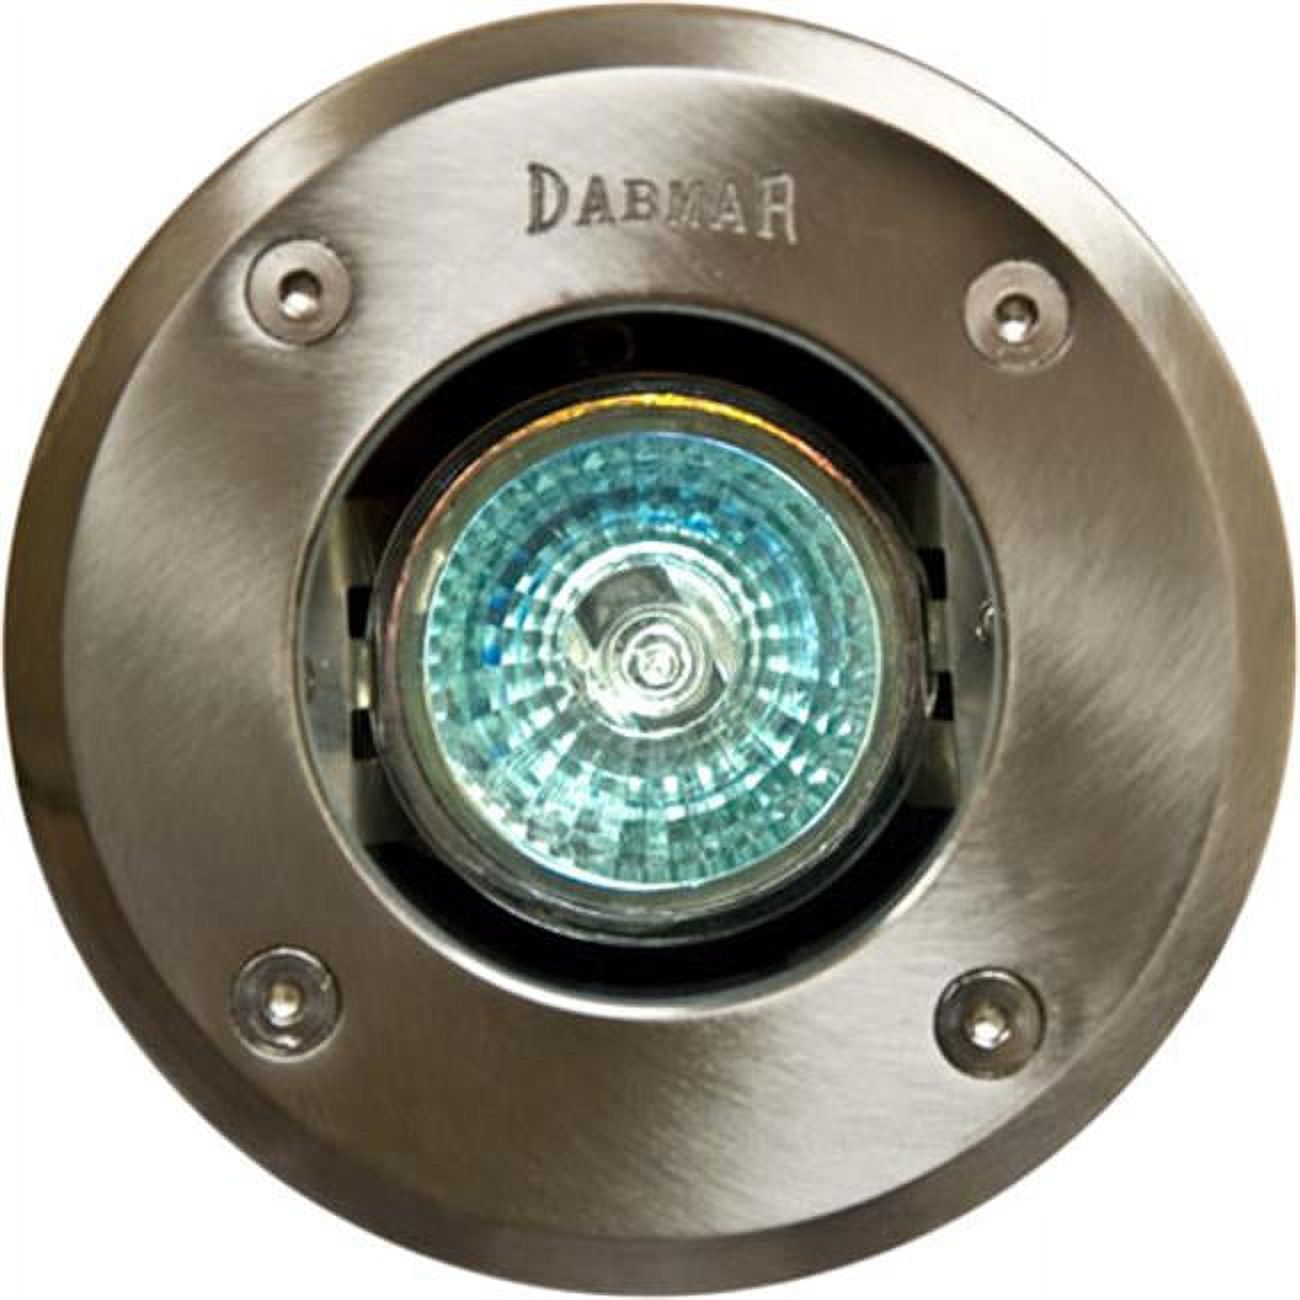 Dabmar Lighting FG319 Stainless Steel In-Ground Well Light with Fiberglass Body- Stainless Steel - image 1 of 2